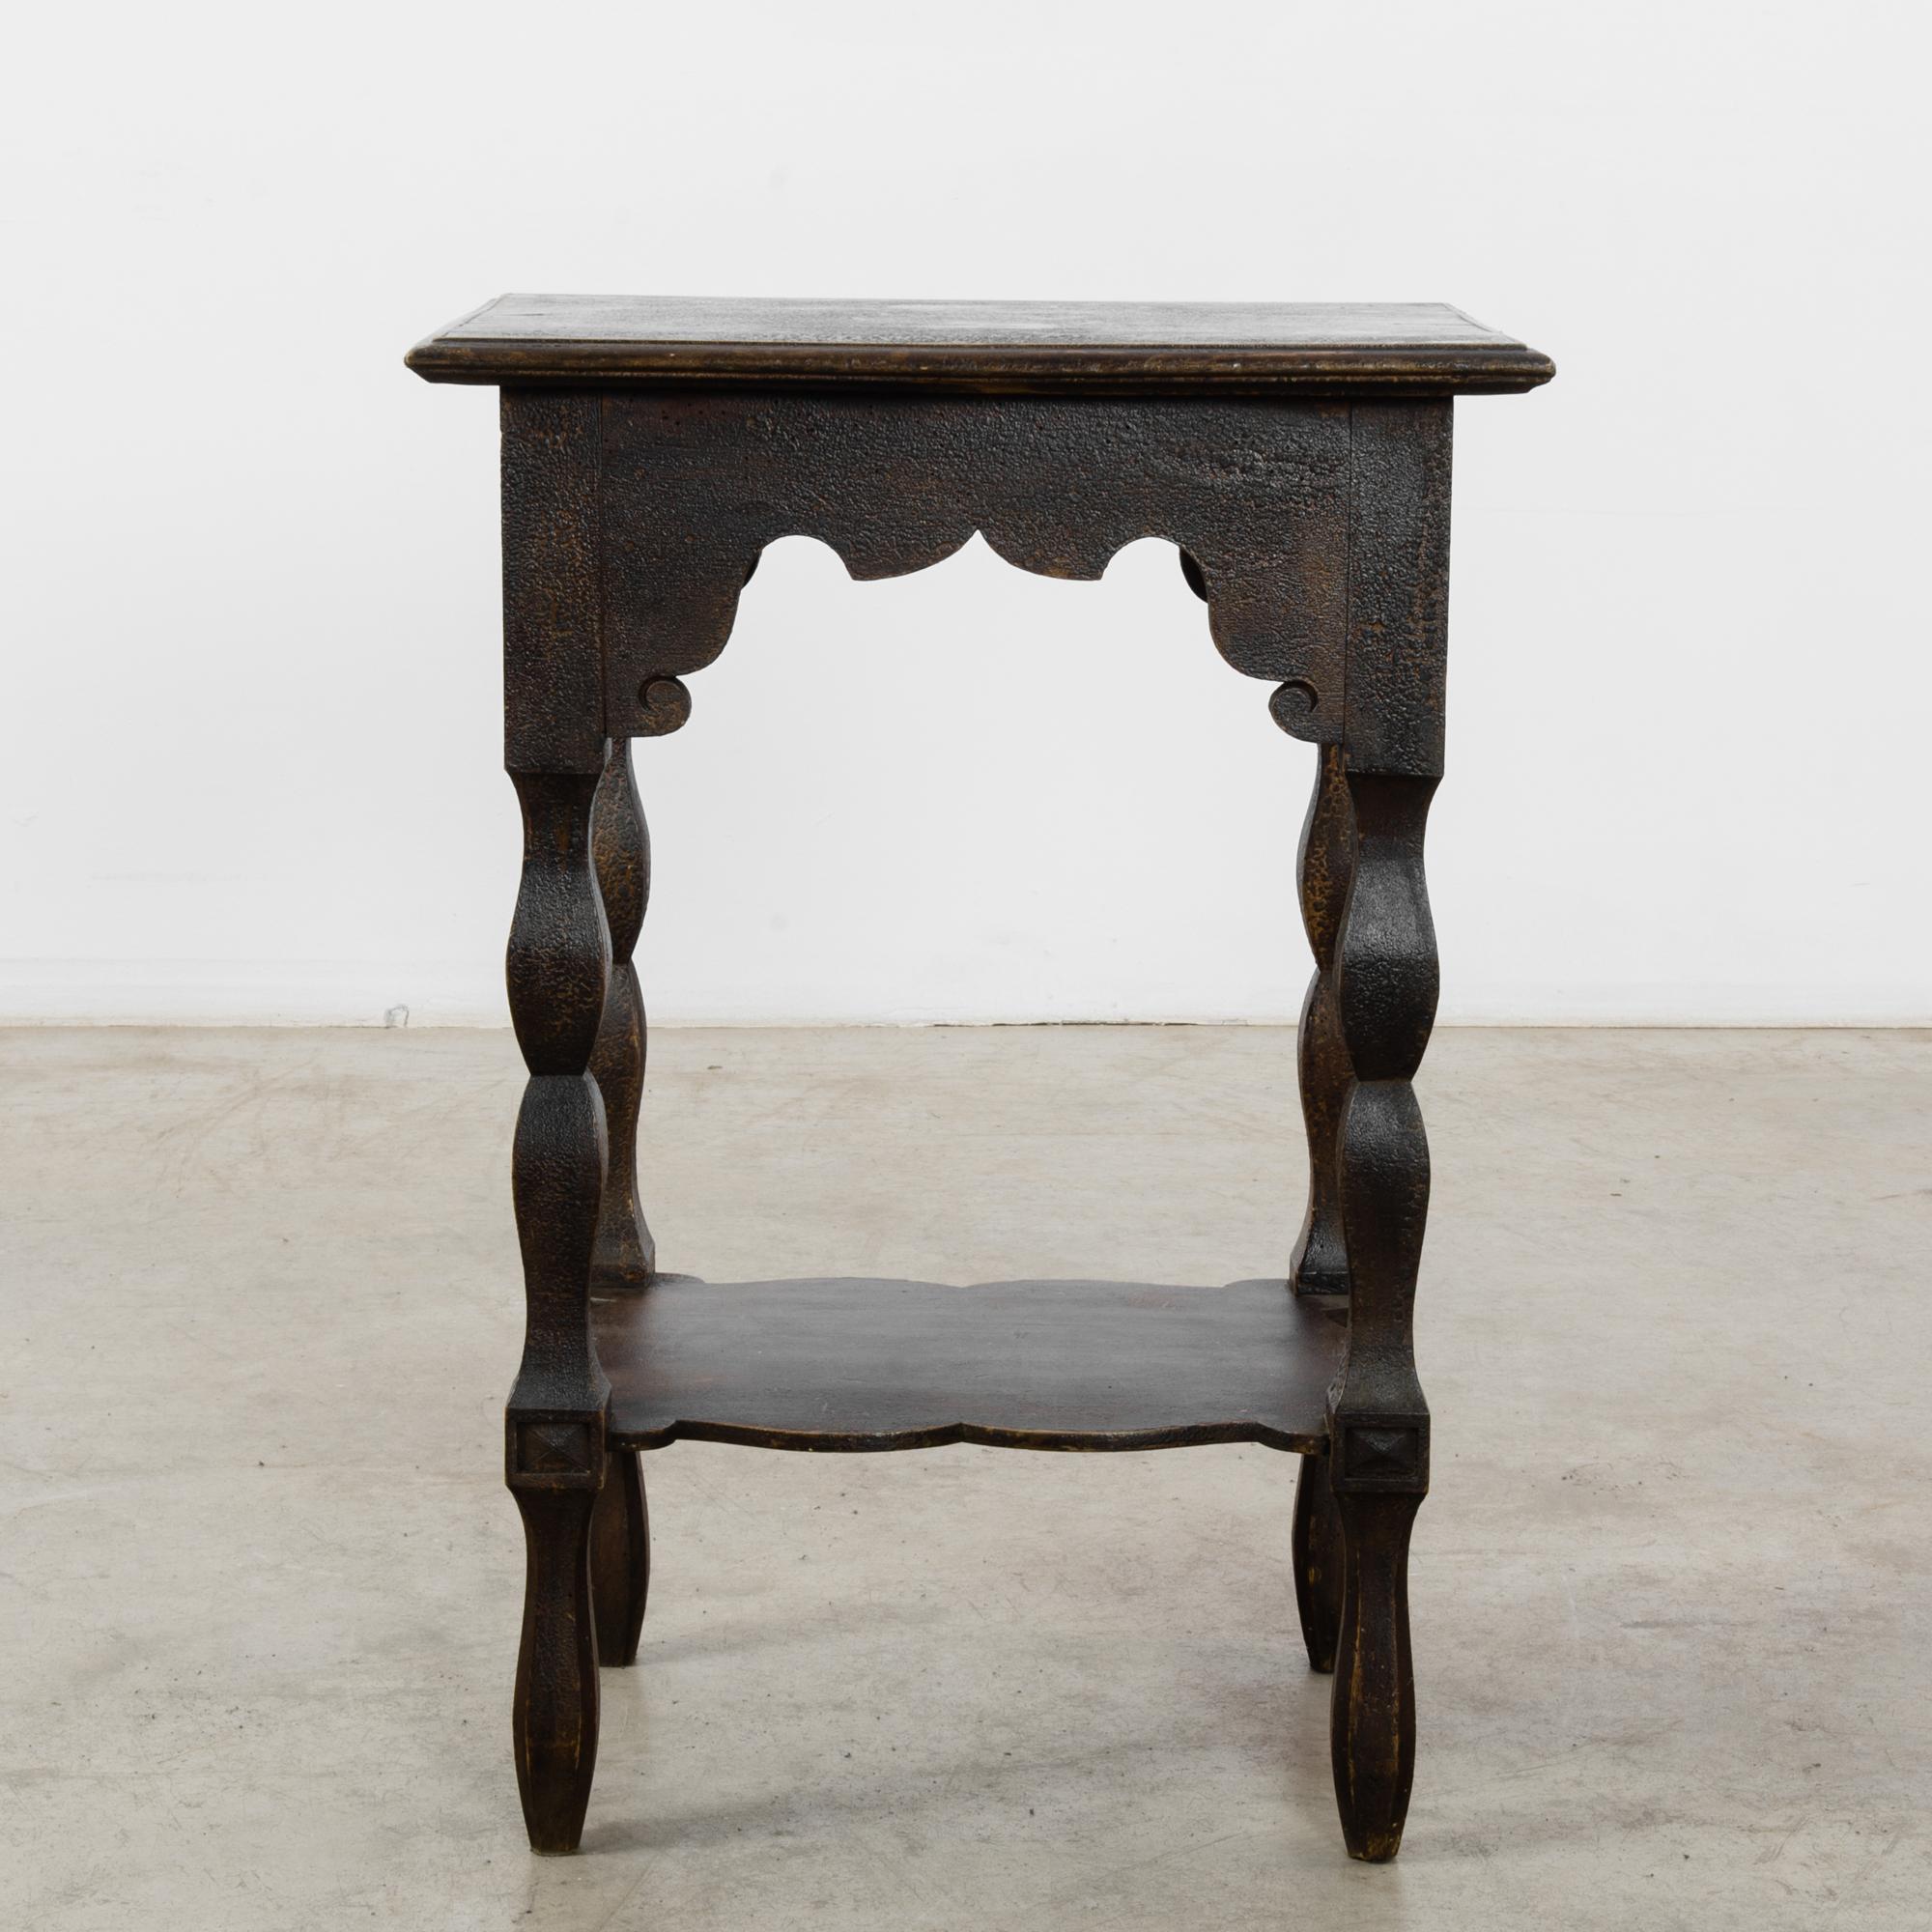 A side table from France, produced circa 1900. This little side table is bold, brown, and beautiful with its original patination raising up to create a textured surface. Features a lower shelf, nestled between legs of carefully constructed tapered